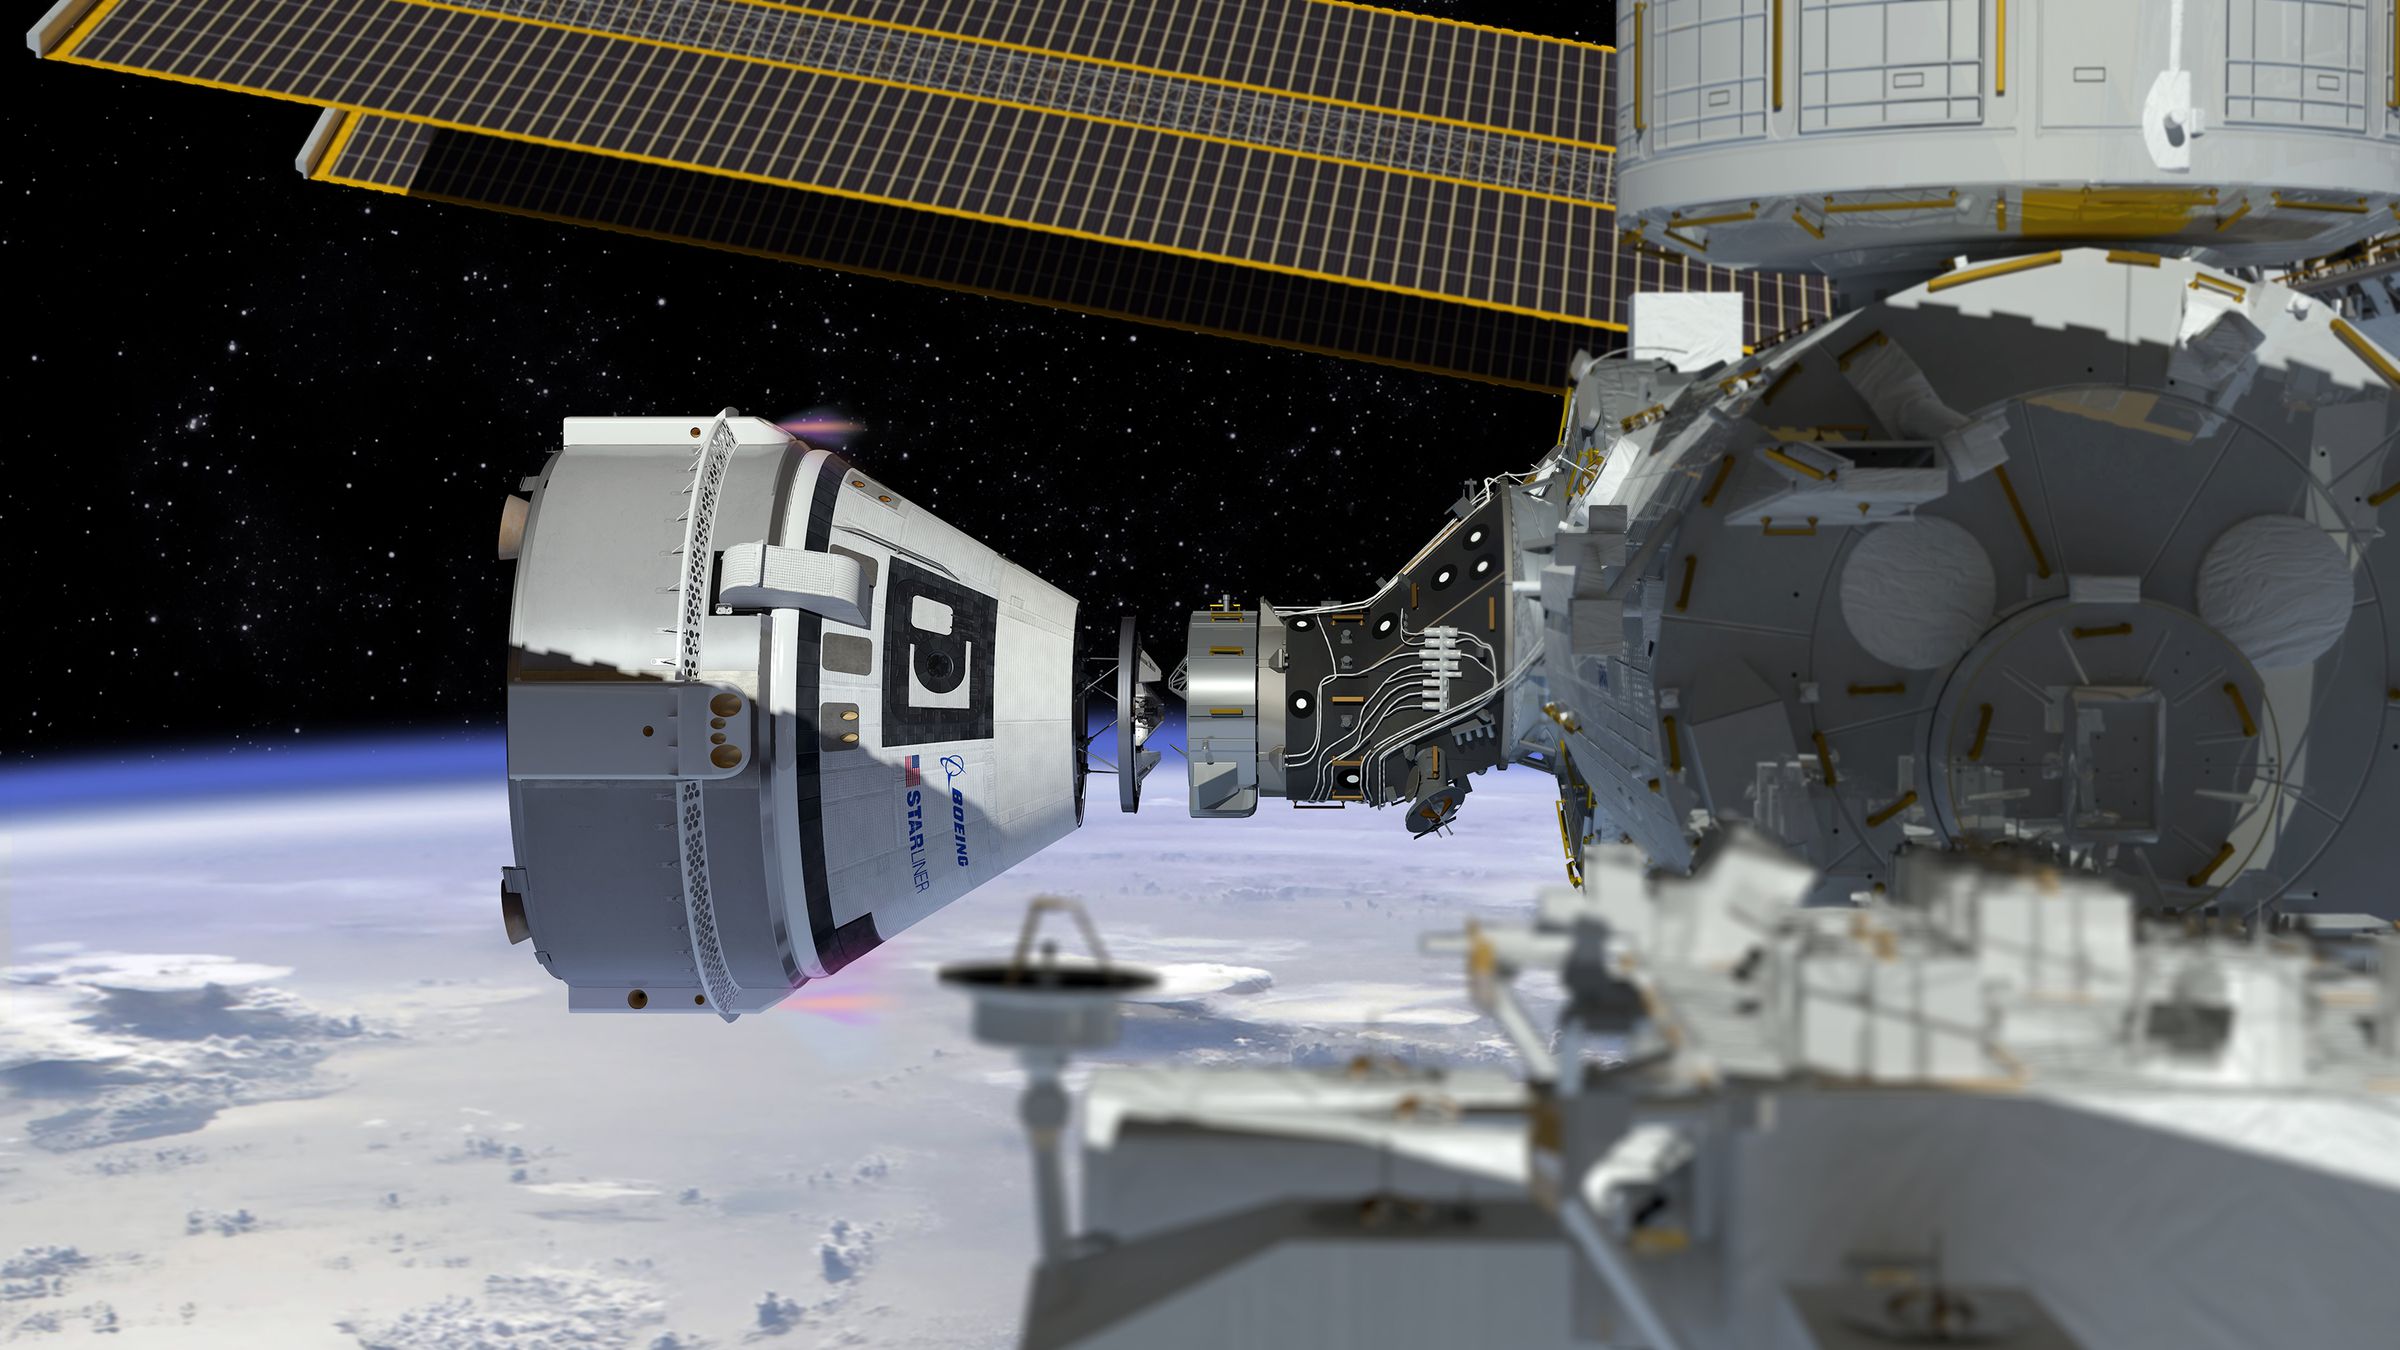 An artistic rendering of what Starliner’s docking at the ISS will look like.